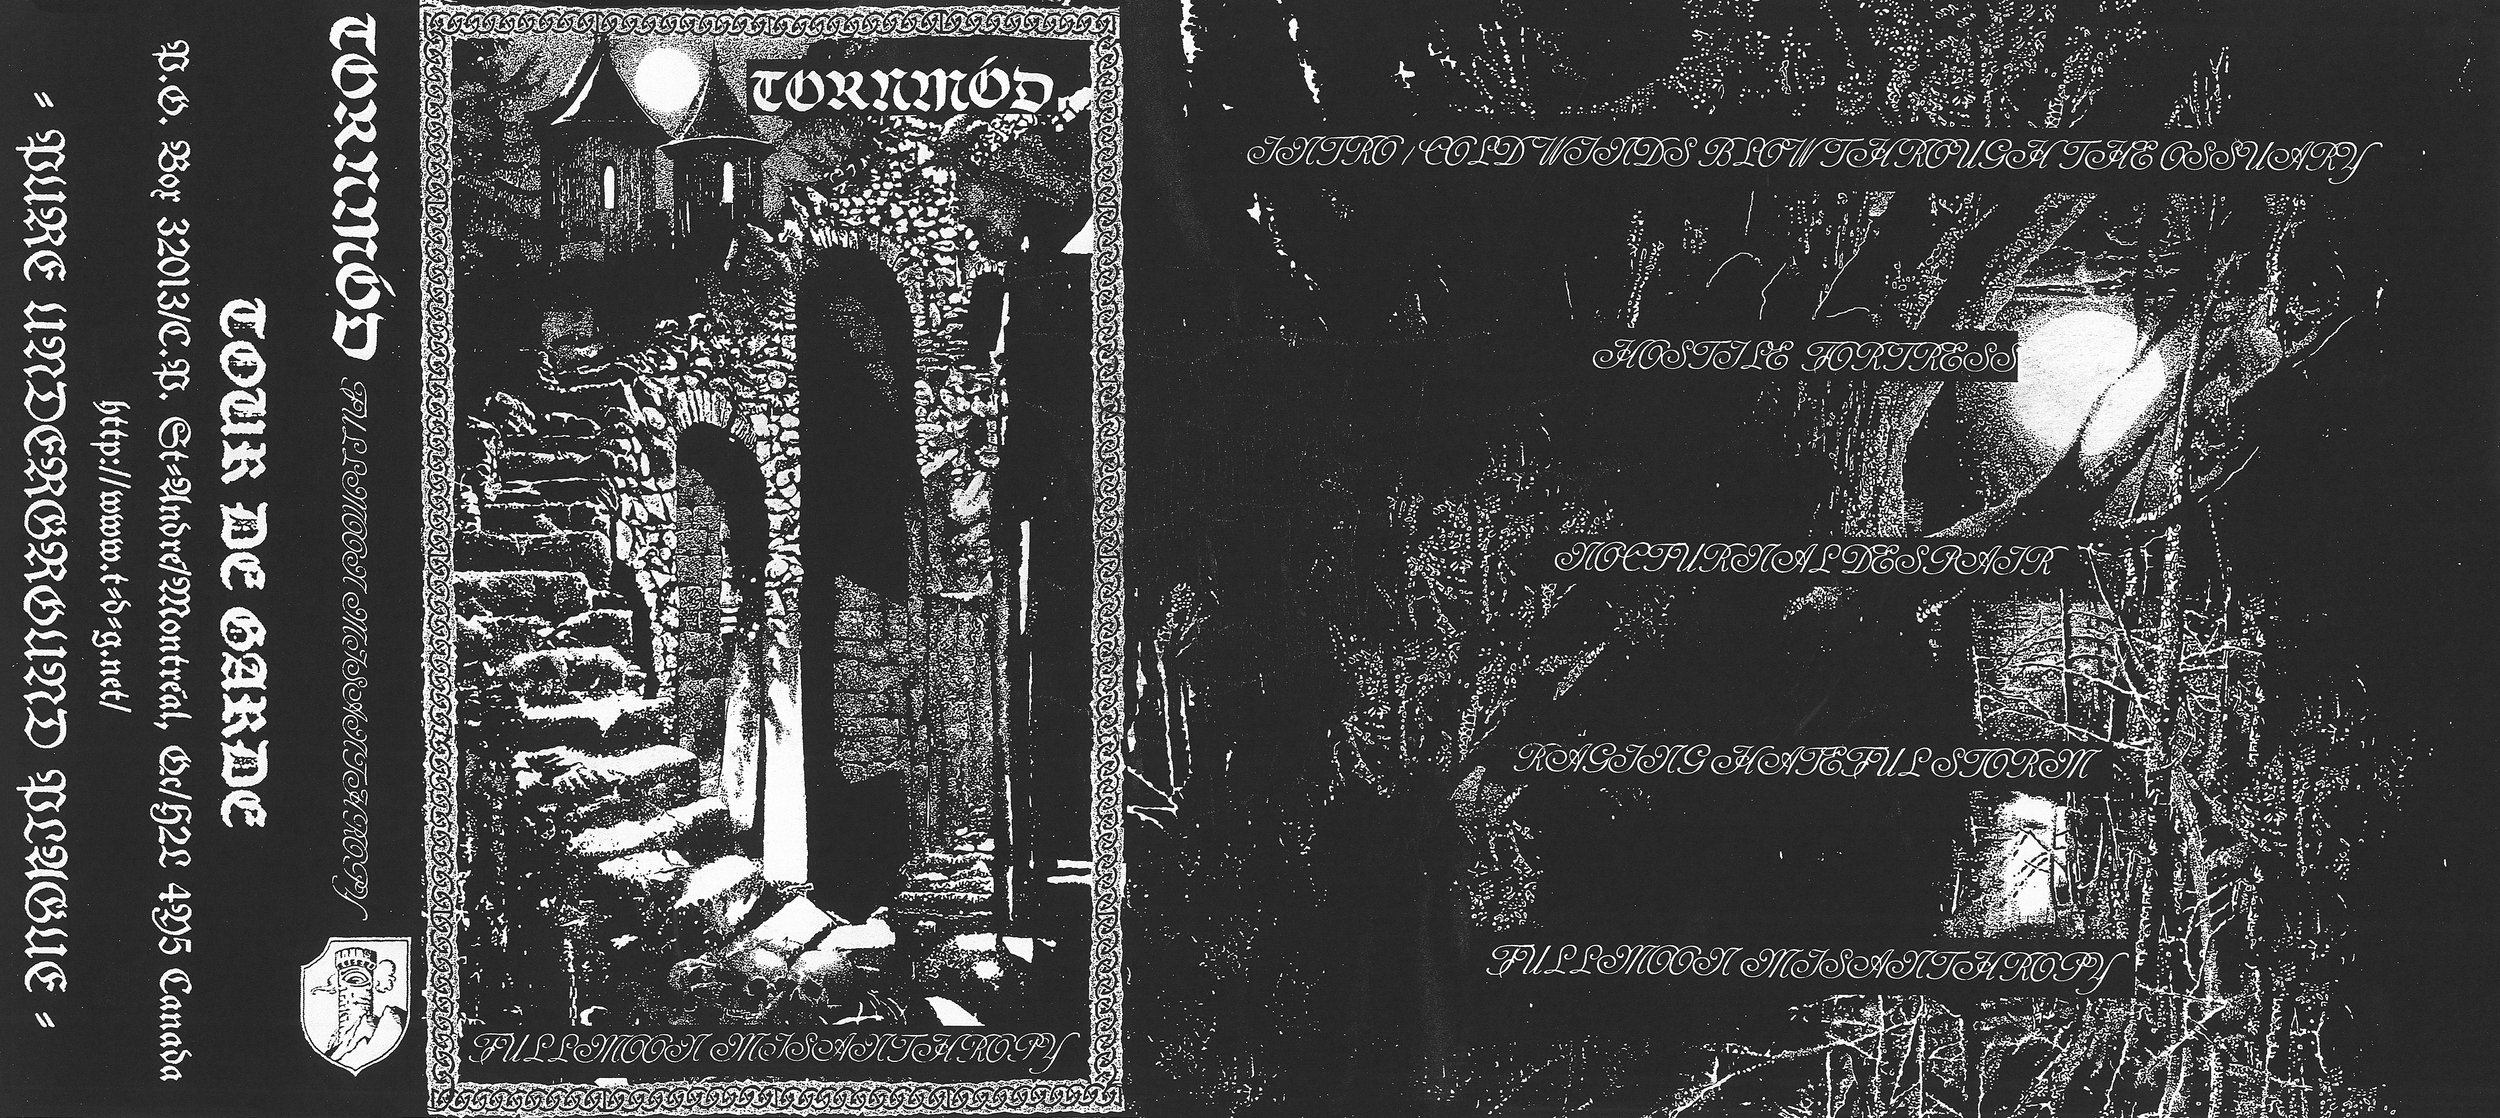 TORNMOD ' Fullmoon Misanthropy" Cassette Layout 